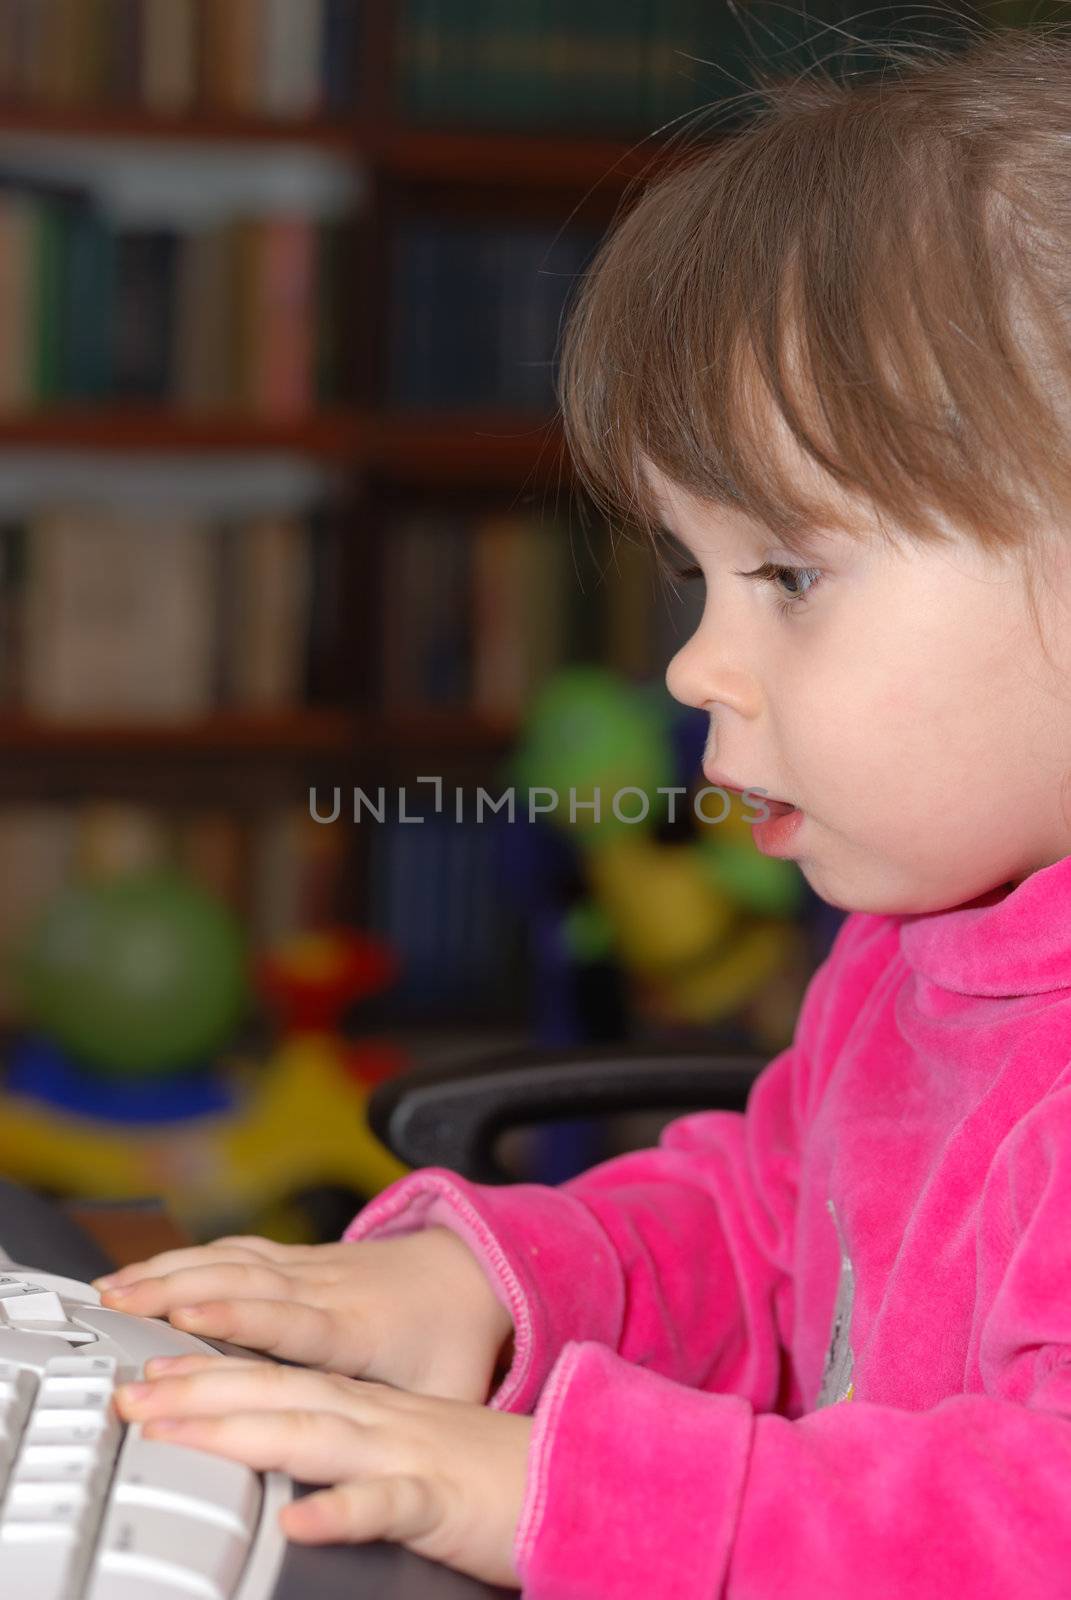 The little girl for studying keyboard of a computer